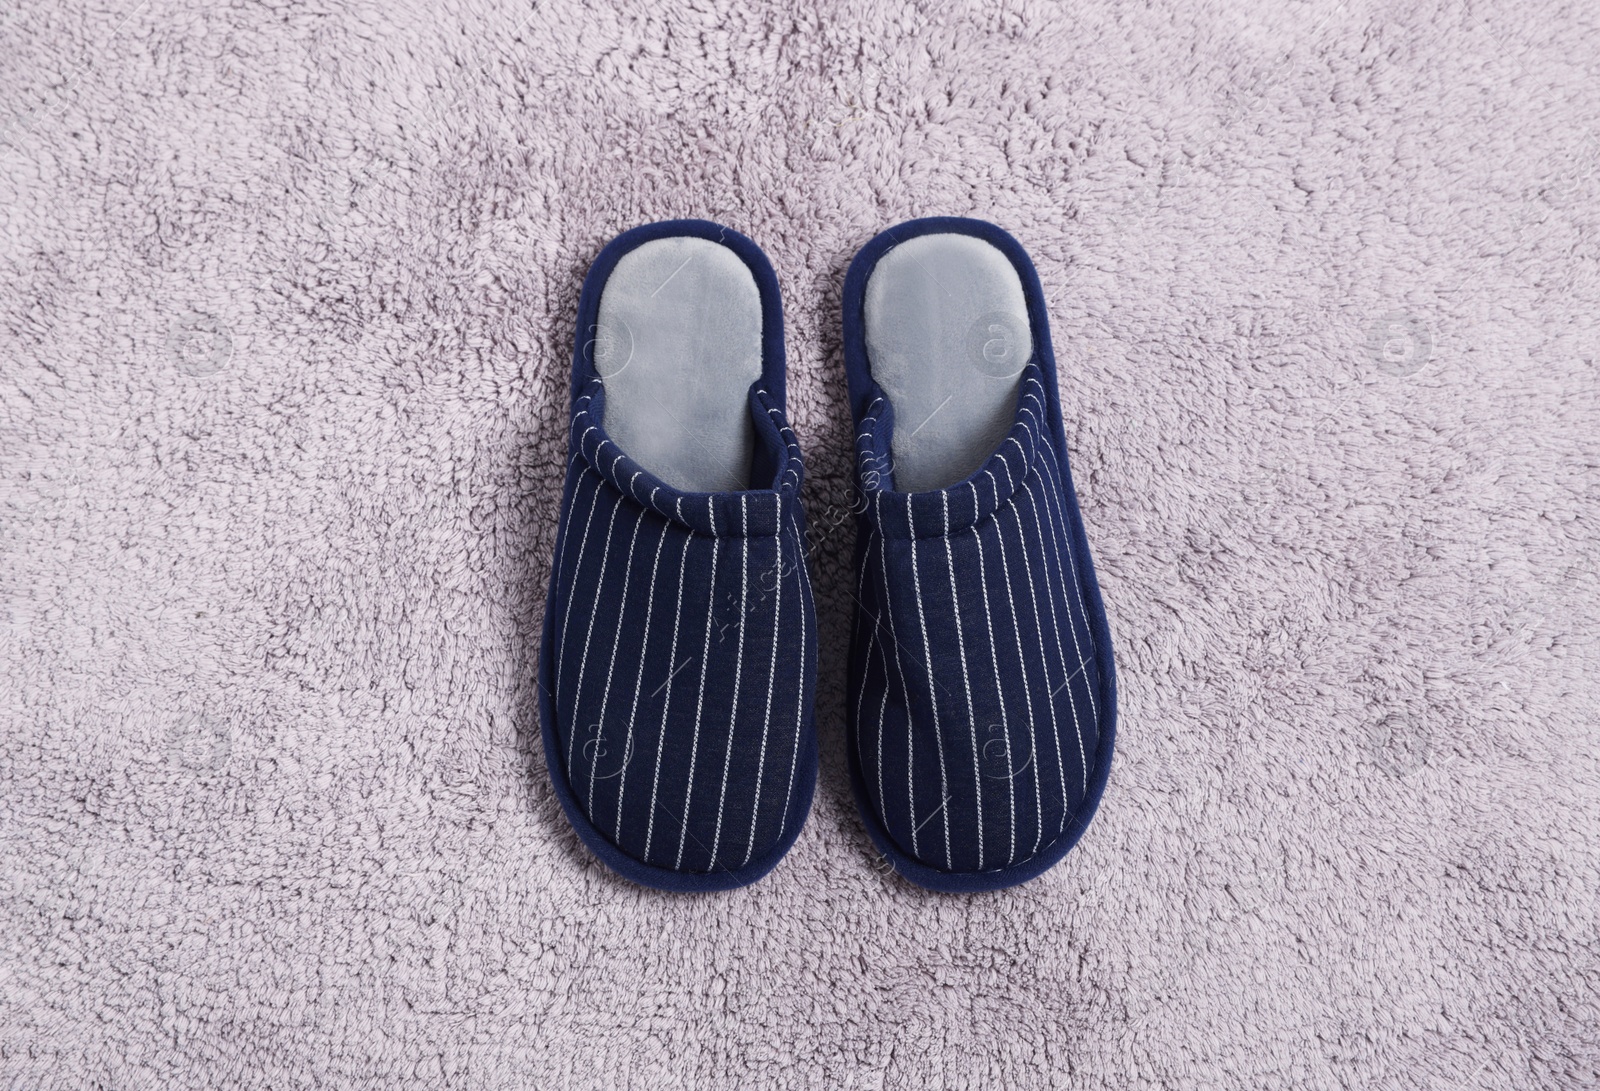 Photo of Pair of stylish slippers on light grey carpet, top view